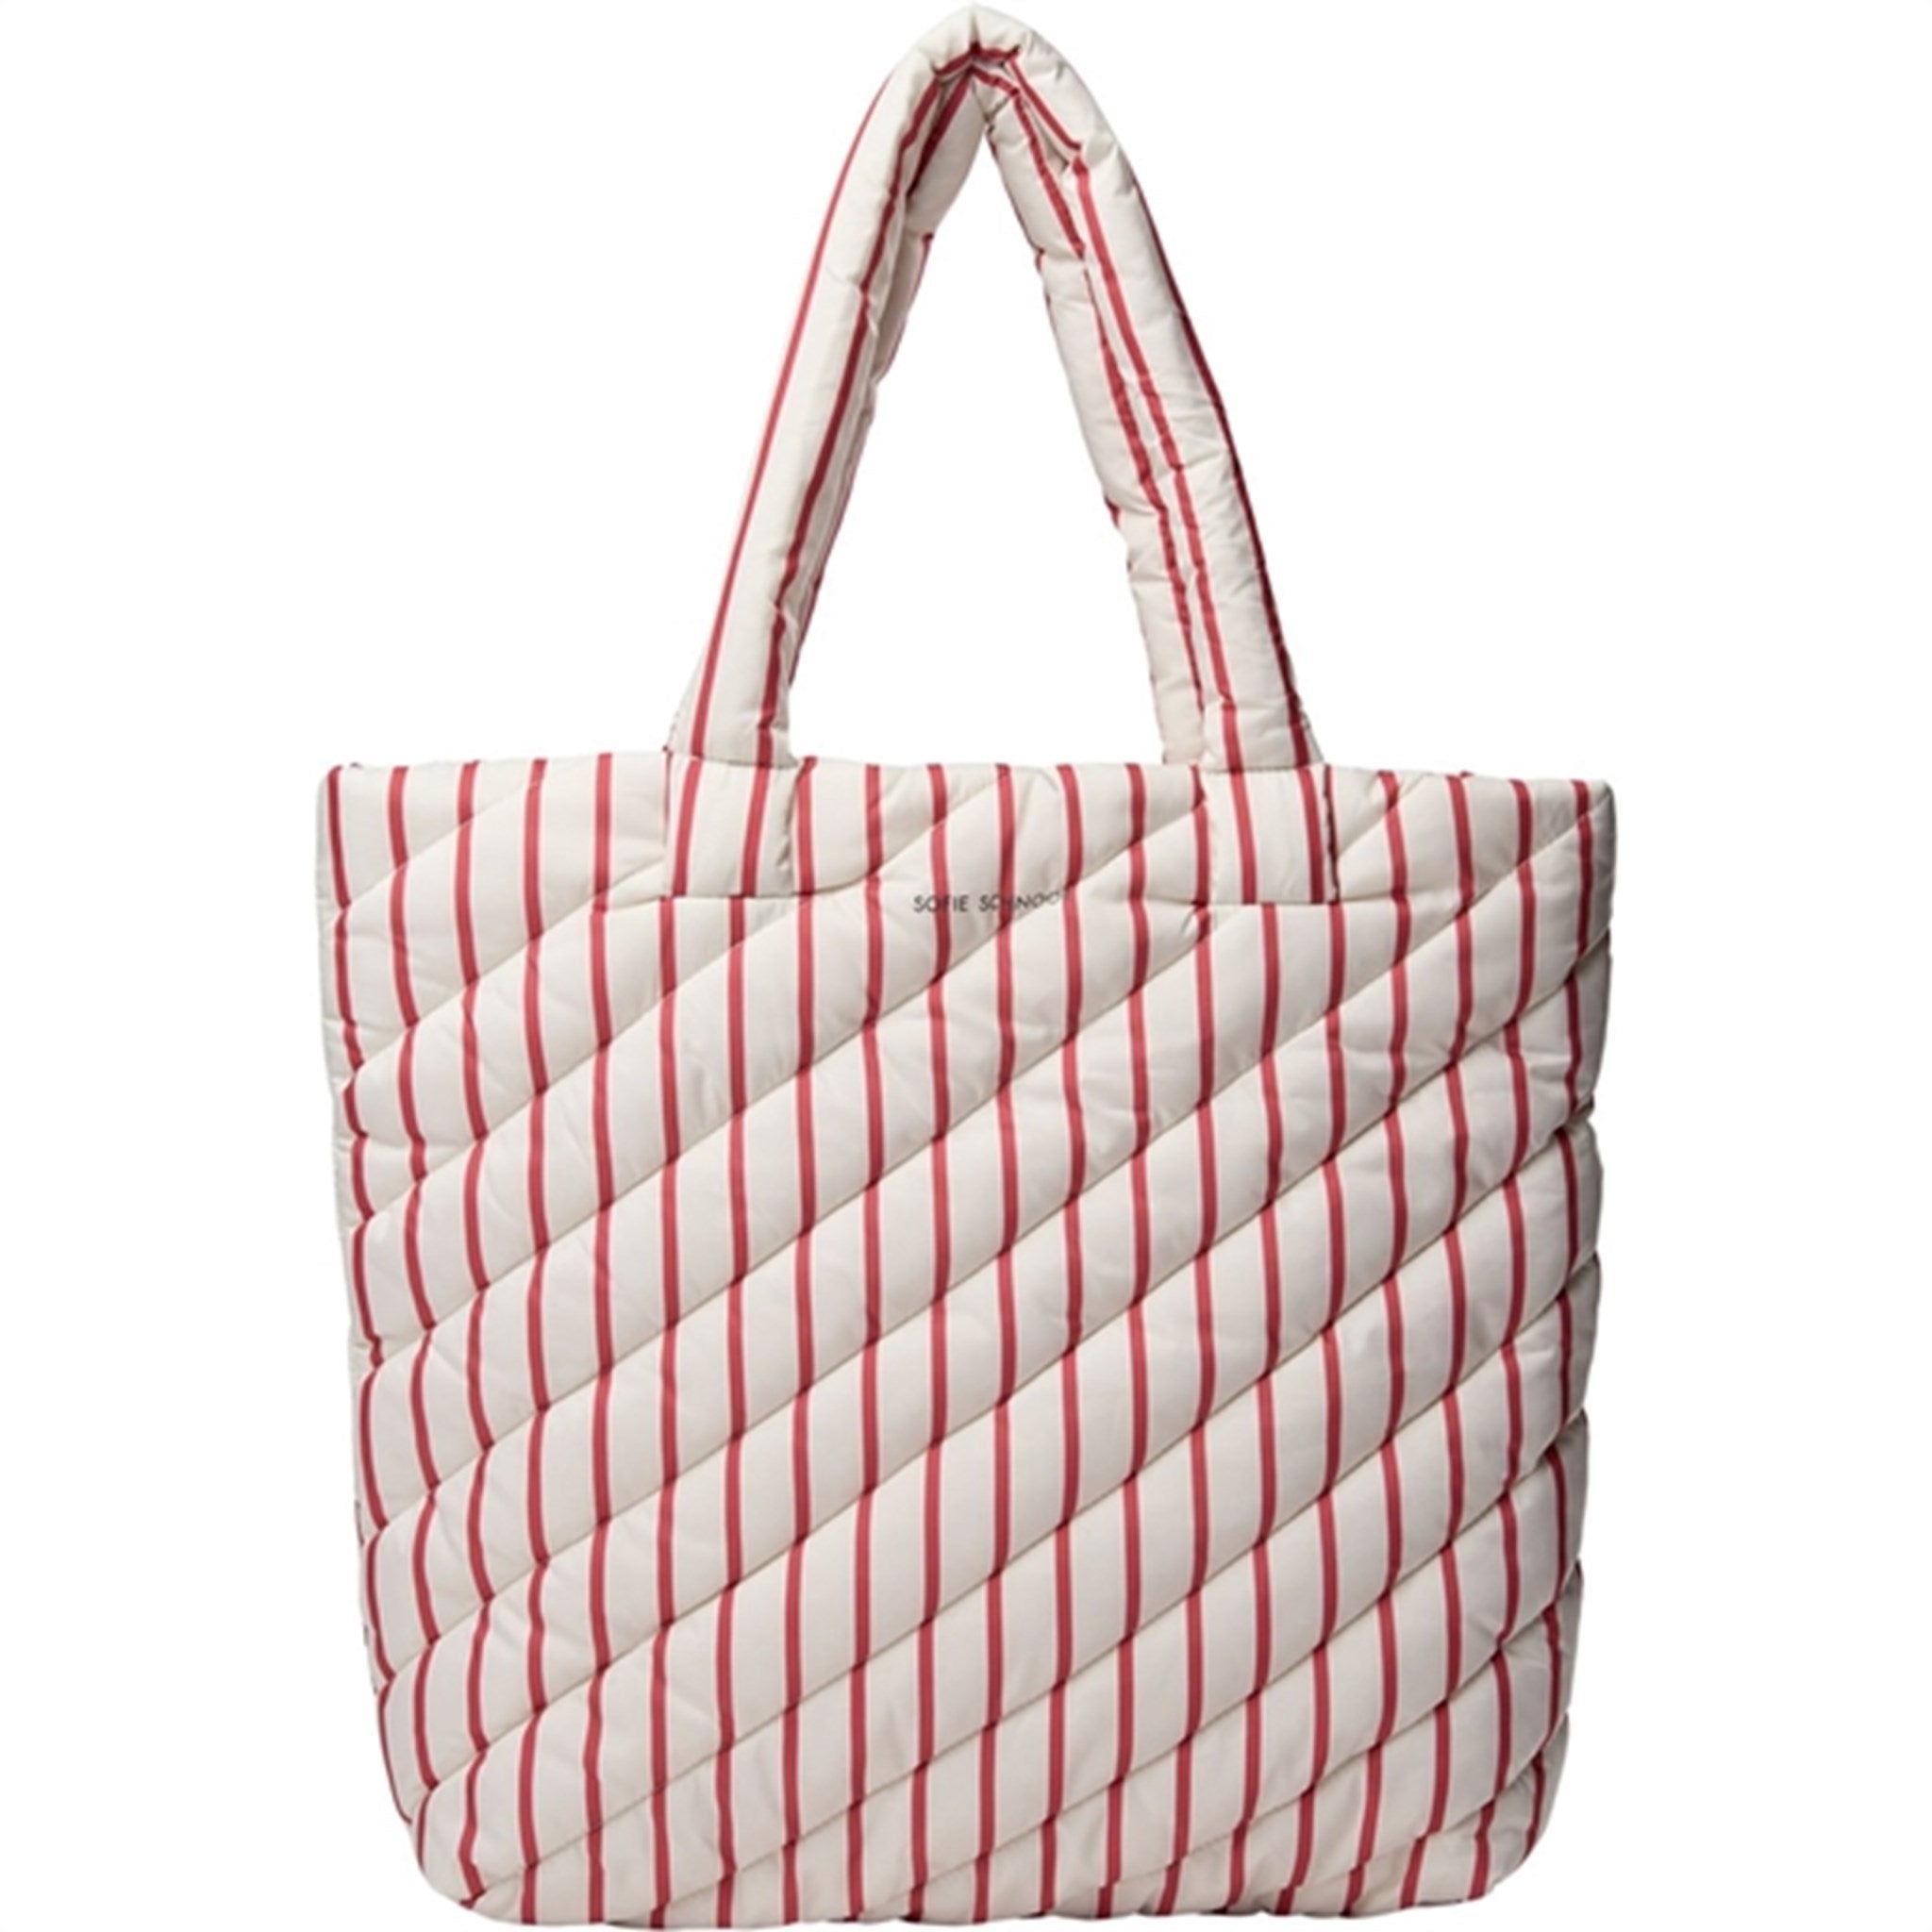 Sofie Schnoor Young Off White/ Berry Striped Totebag